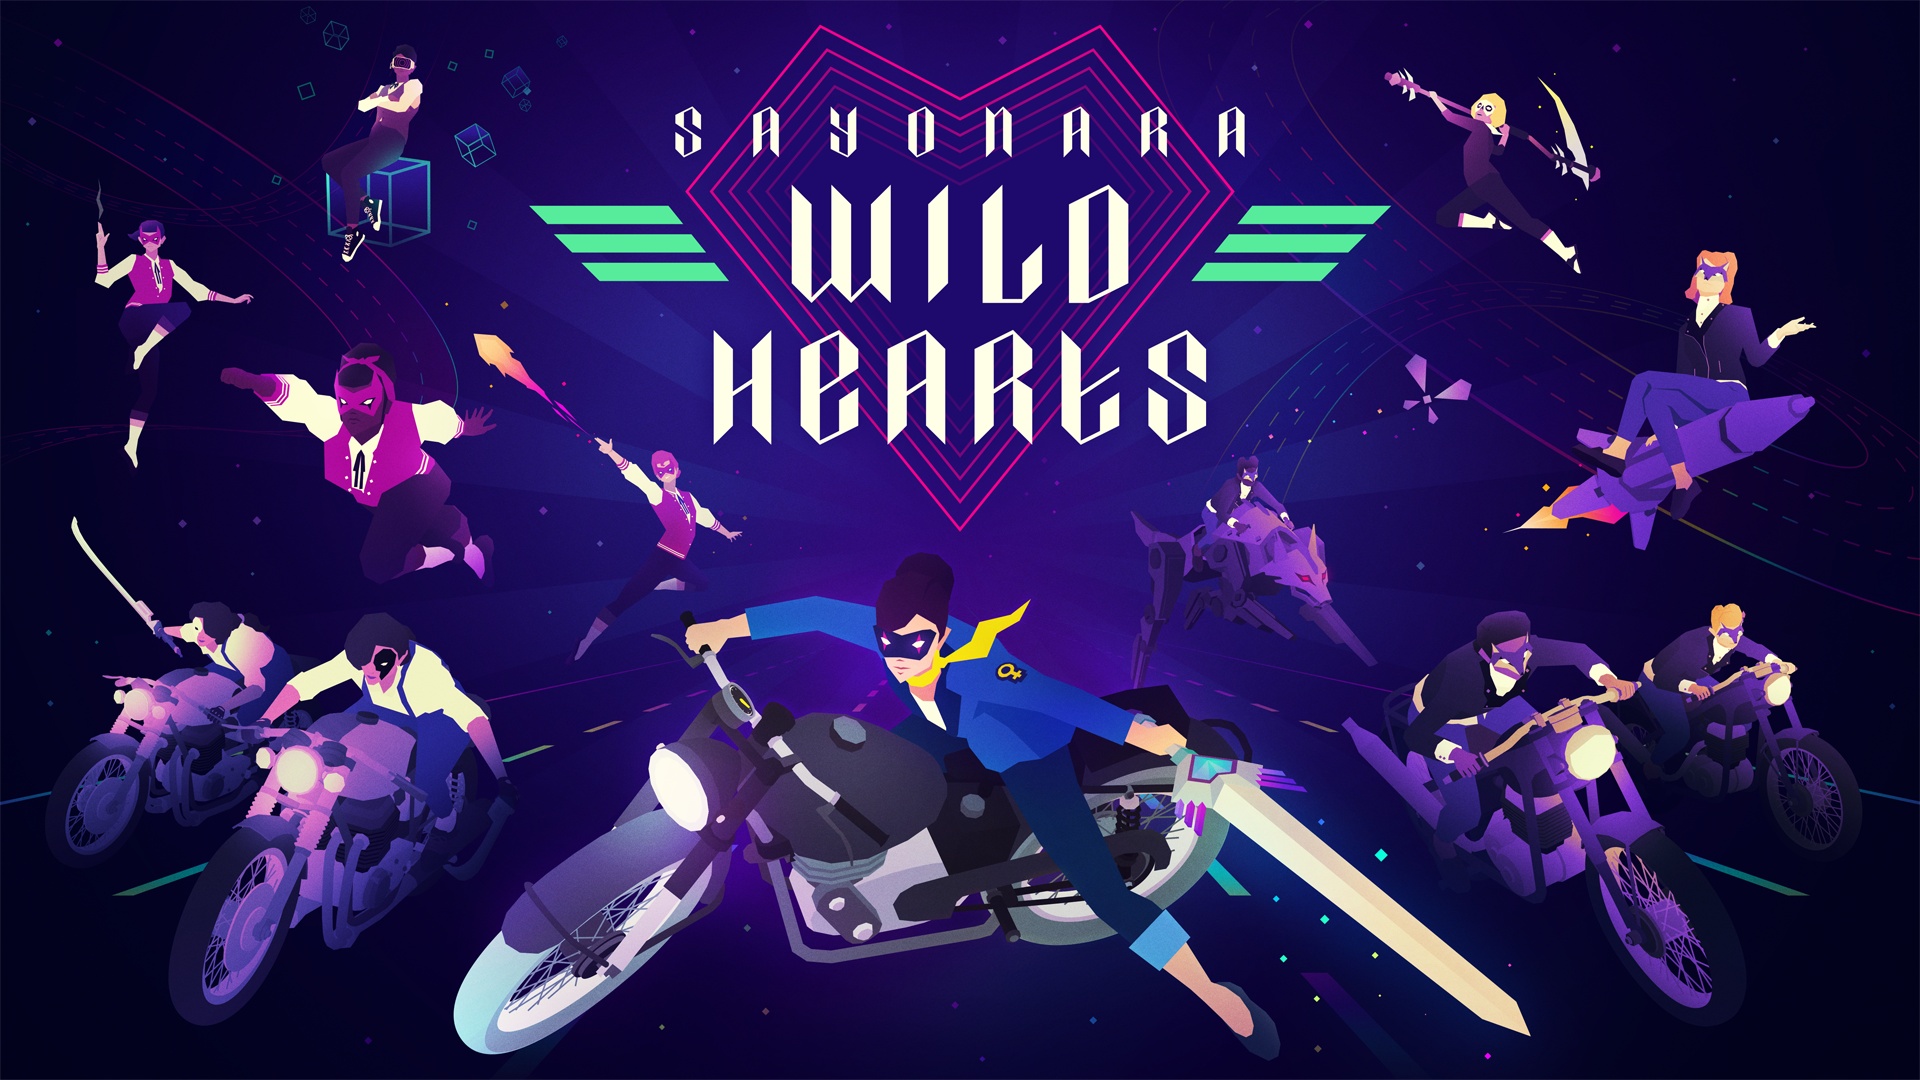 Eclectic Adventure Game Sayonara Wild Hearts Available Now on Xbox One